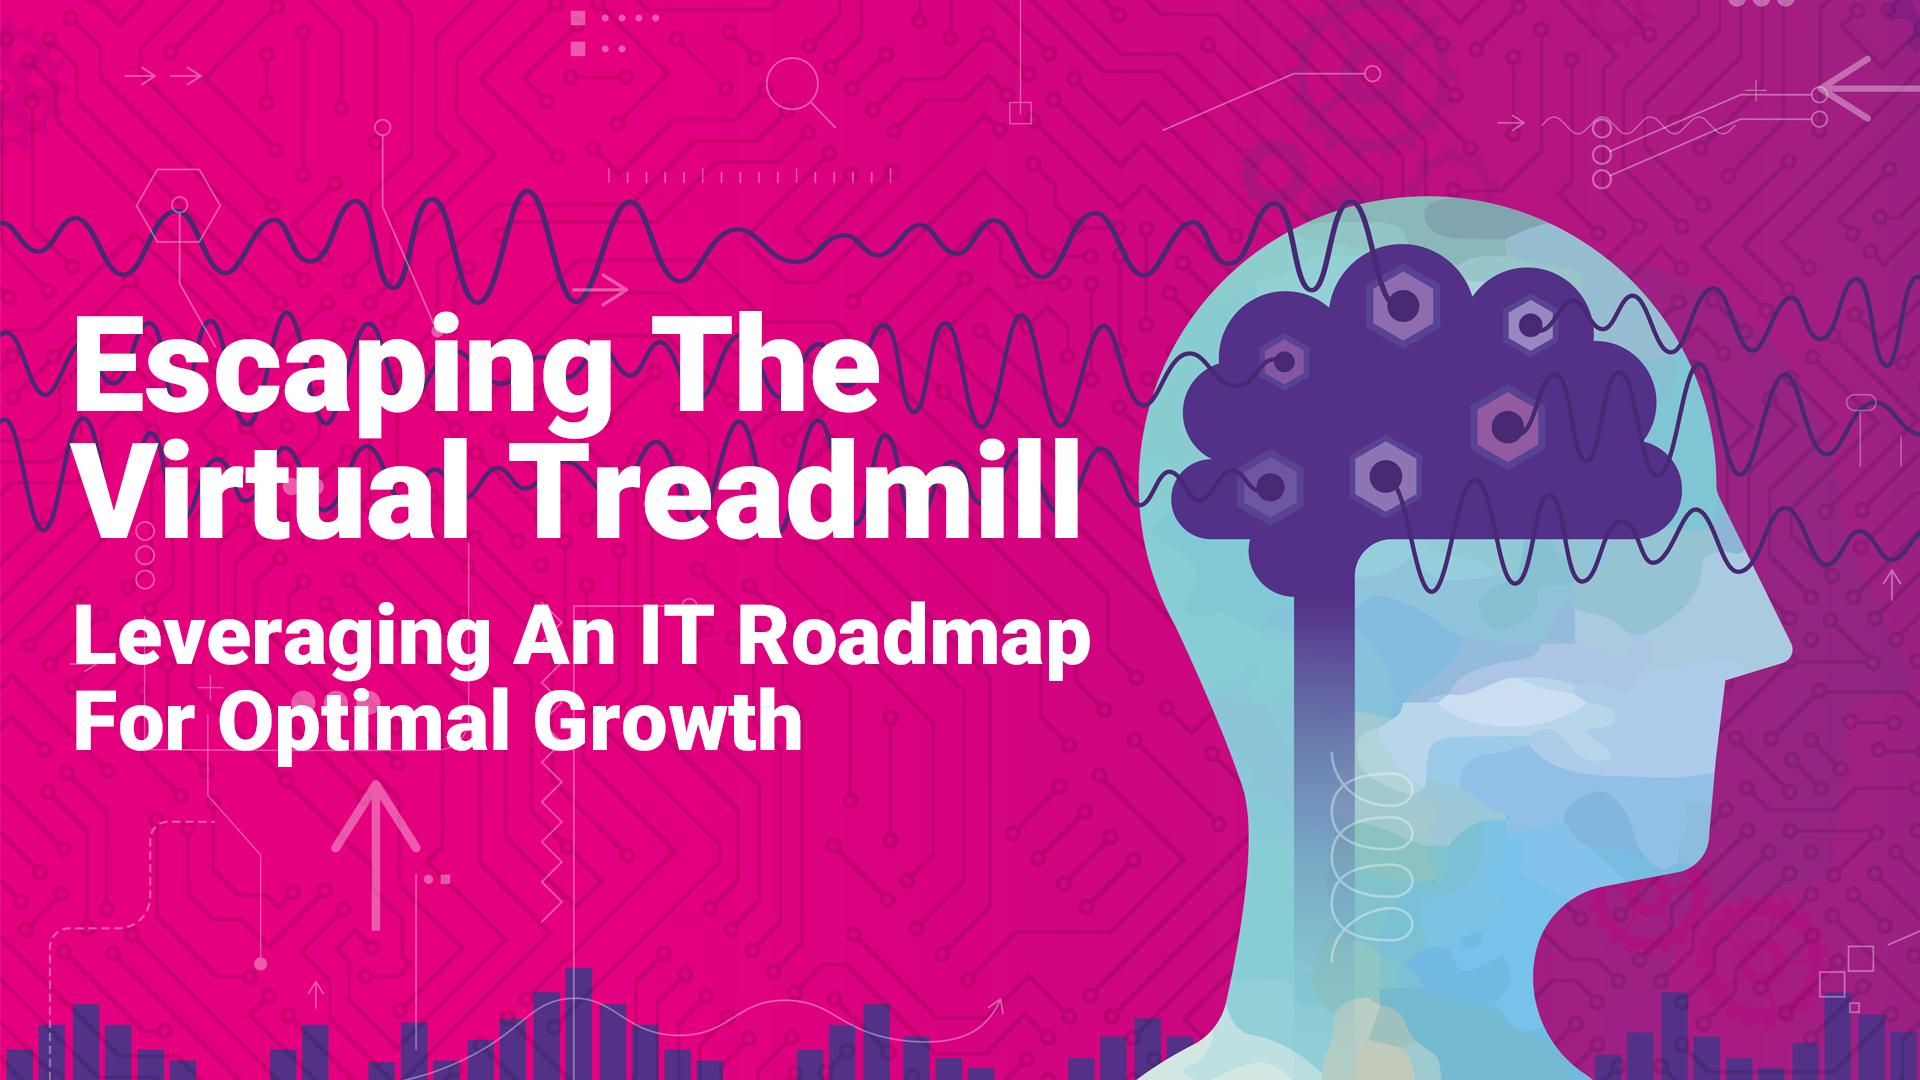 Leveraging An IT Roadmap For Optimal Growth